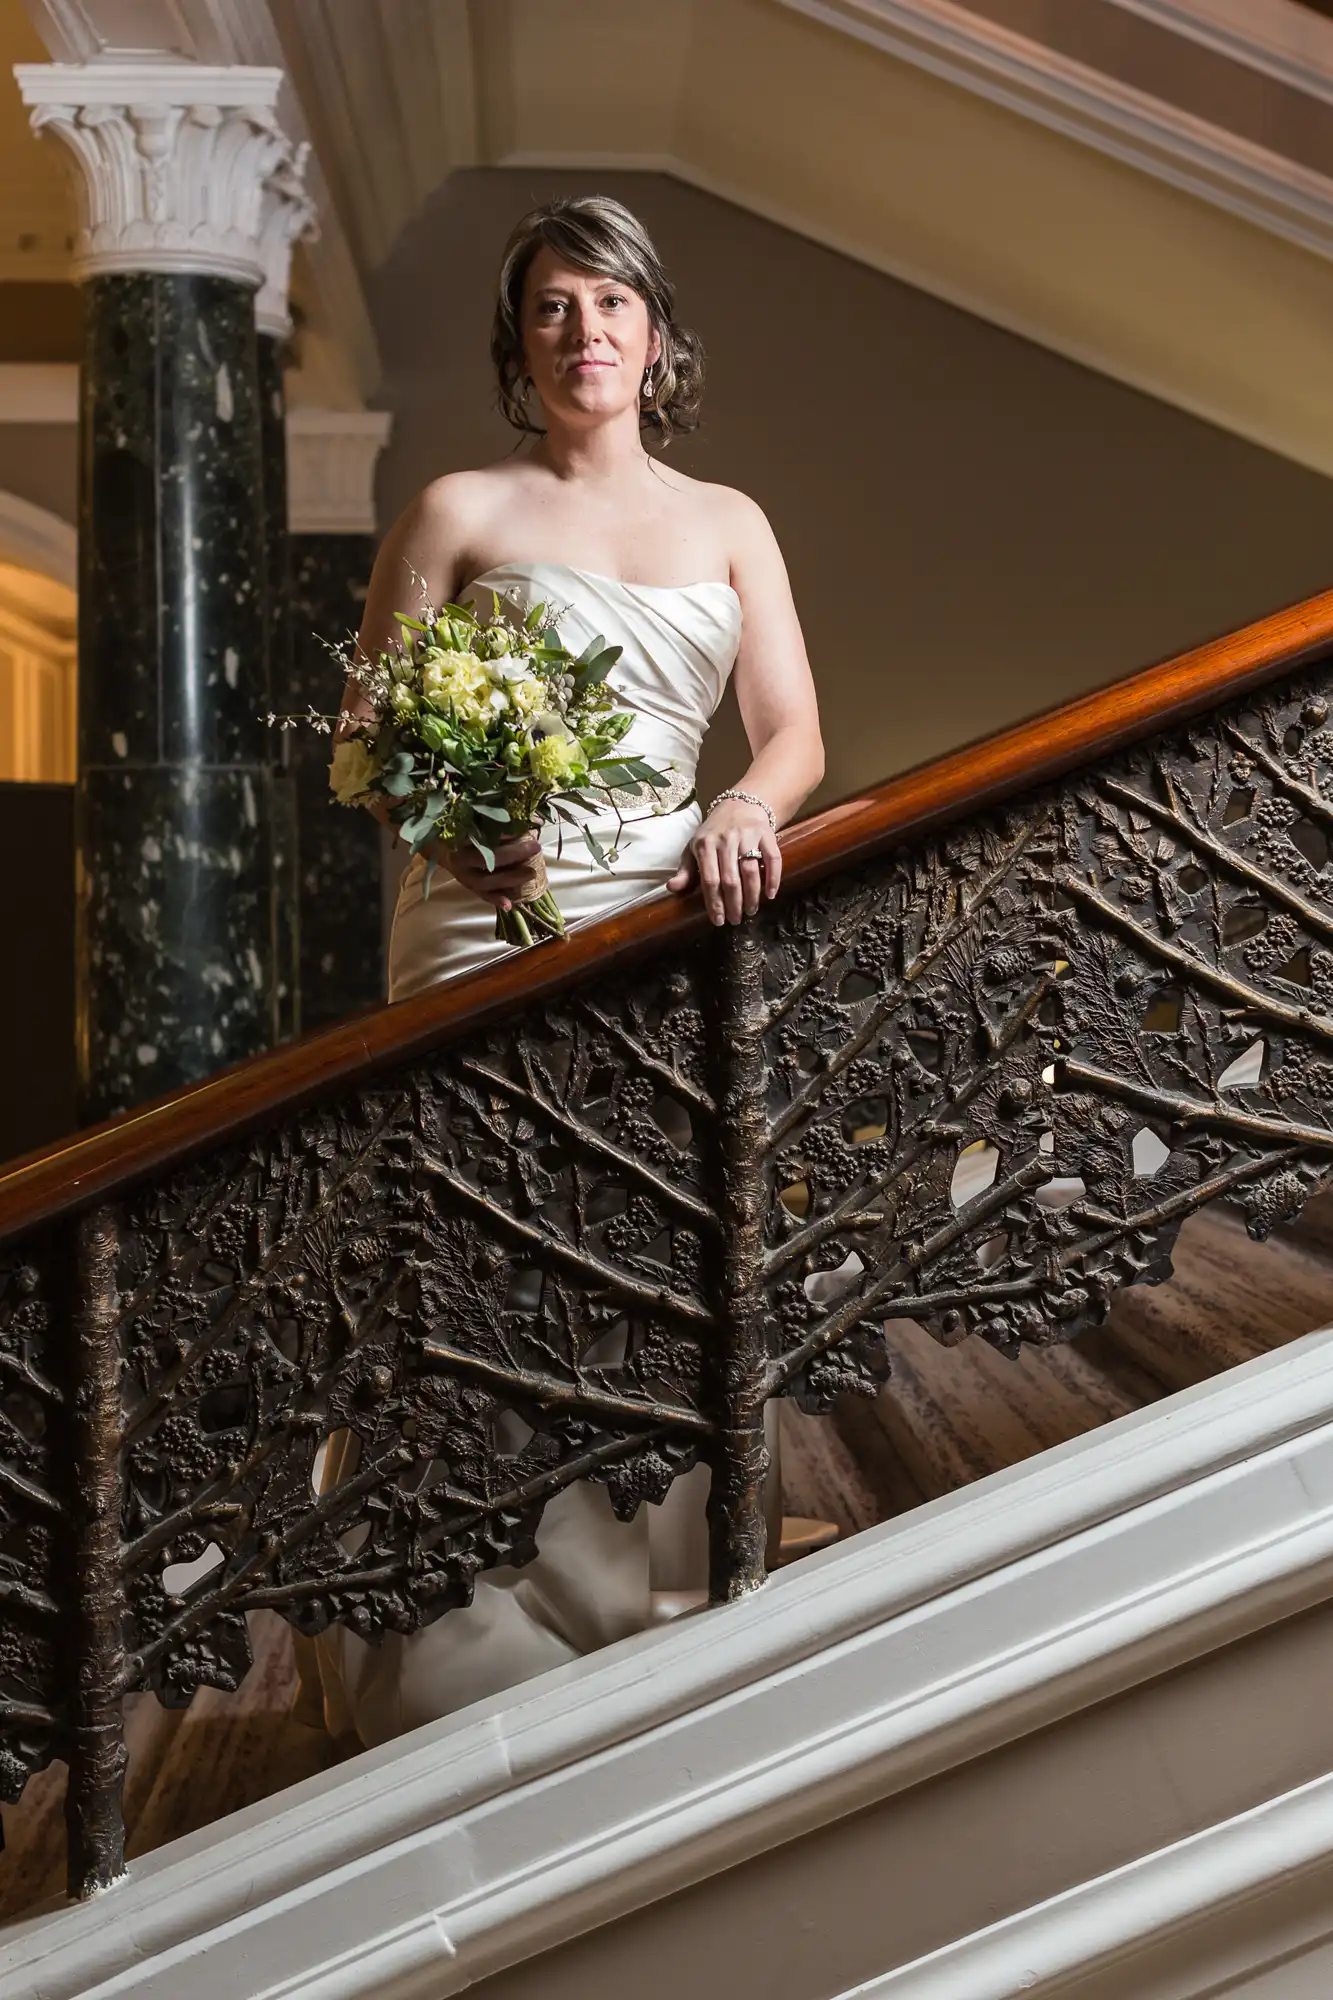 A bride in a strapless white dress, holding a bouquet, standing on a staircase with ornate ironwork.